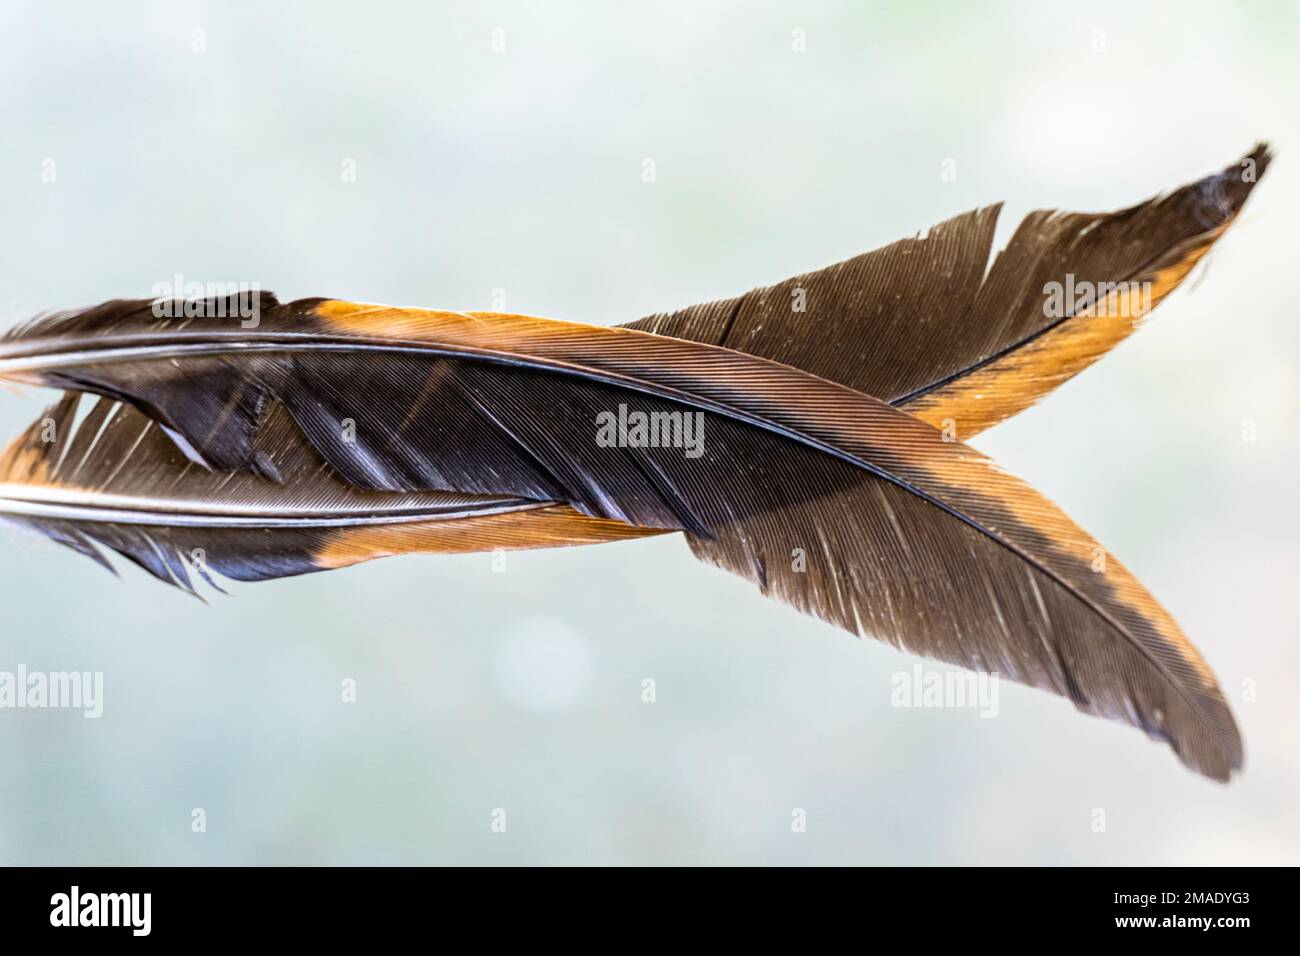 Realistic Bird Feathers. Detailed Colorful Feather of Different